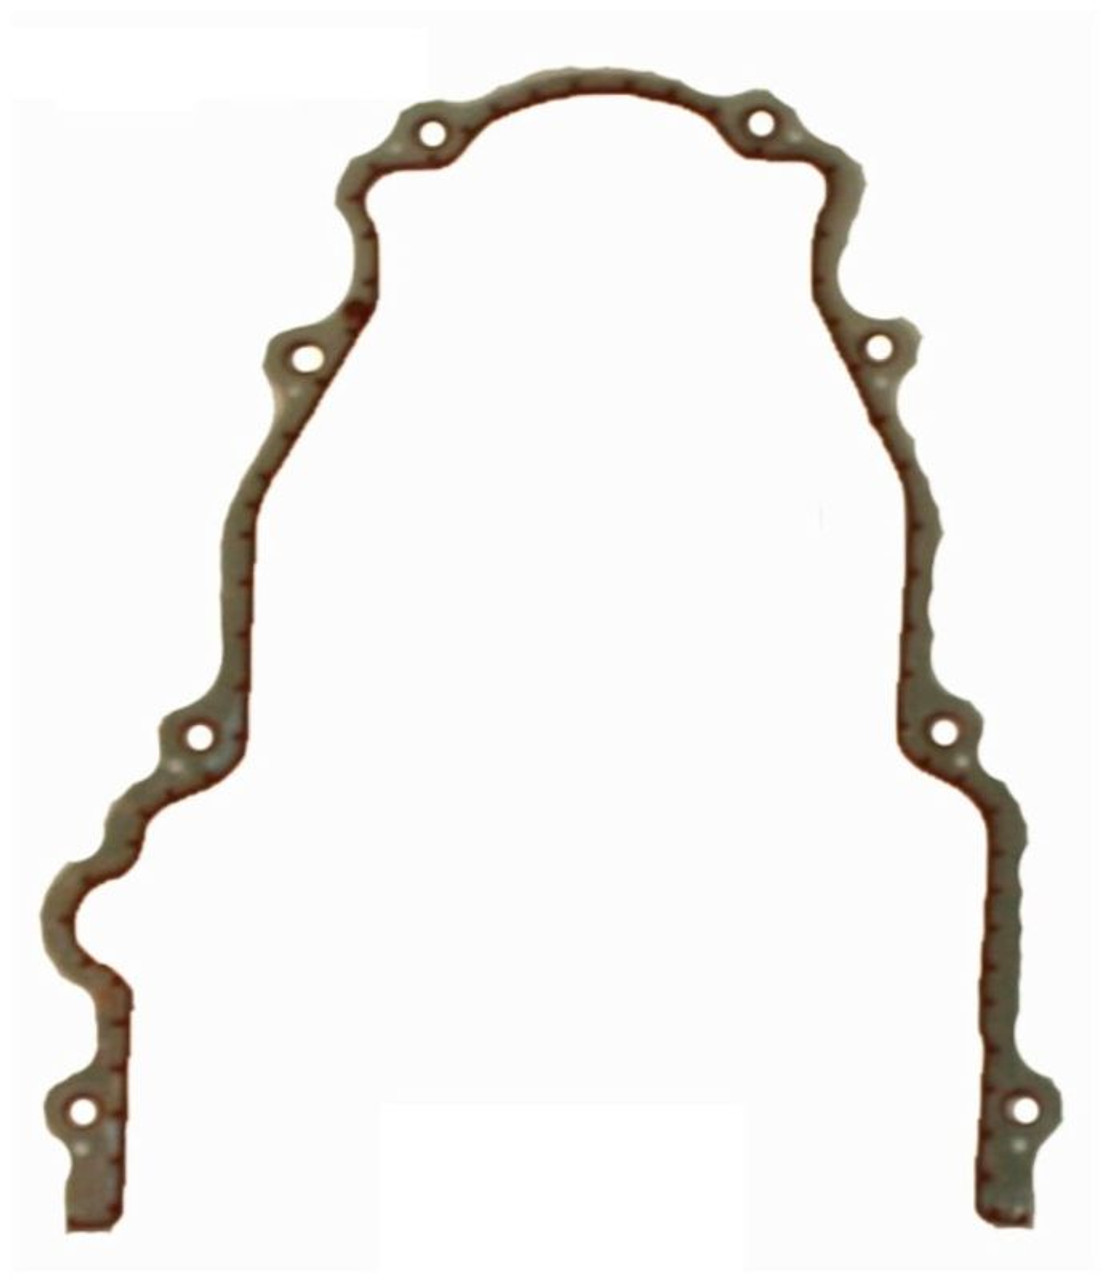 2008 Chevrolet Express 3500 6.0L Engine Timing Cover Gasket TCG293-A -478